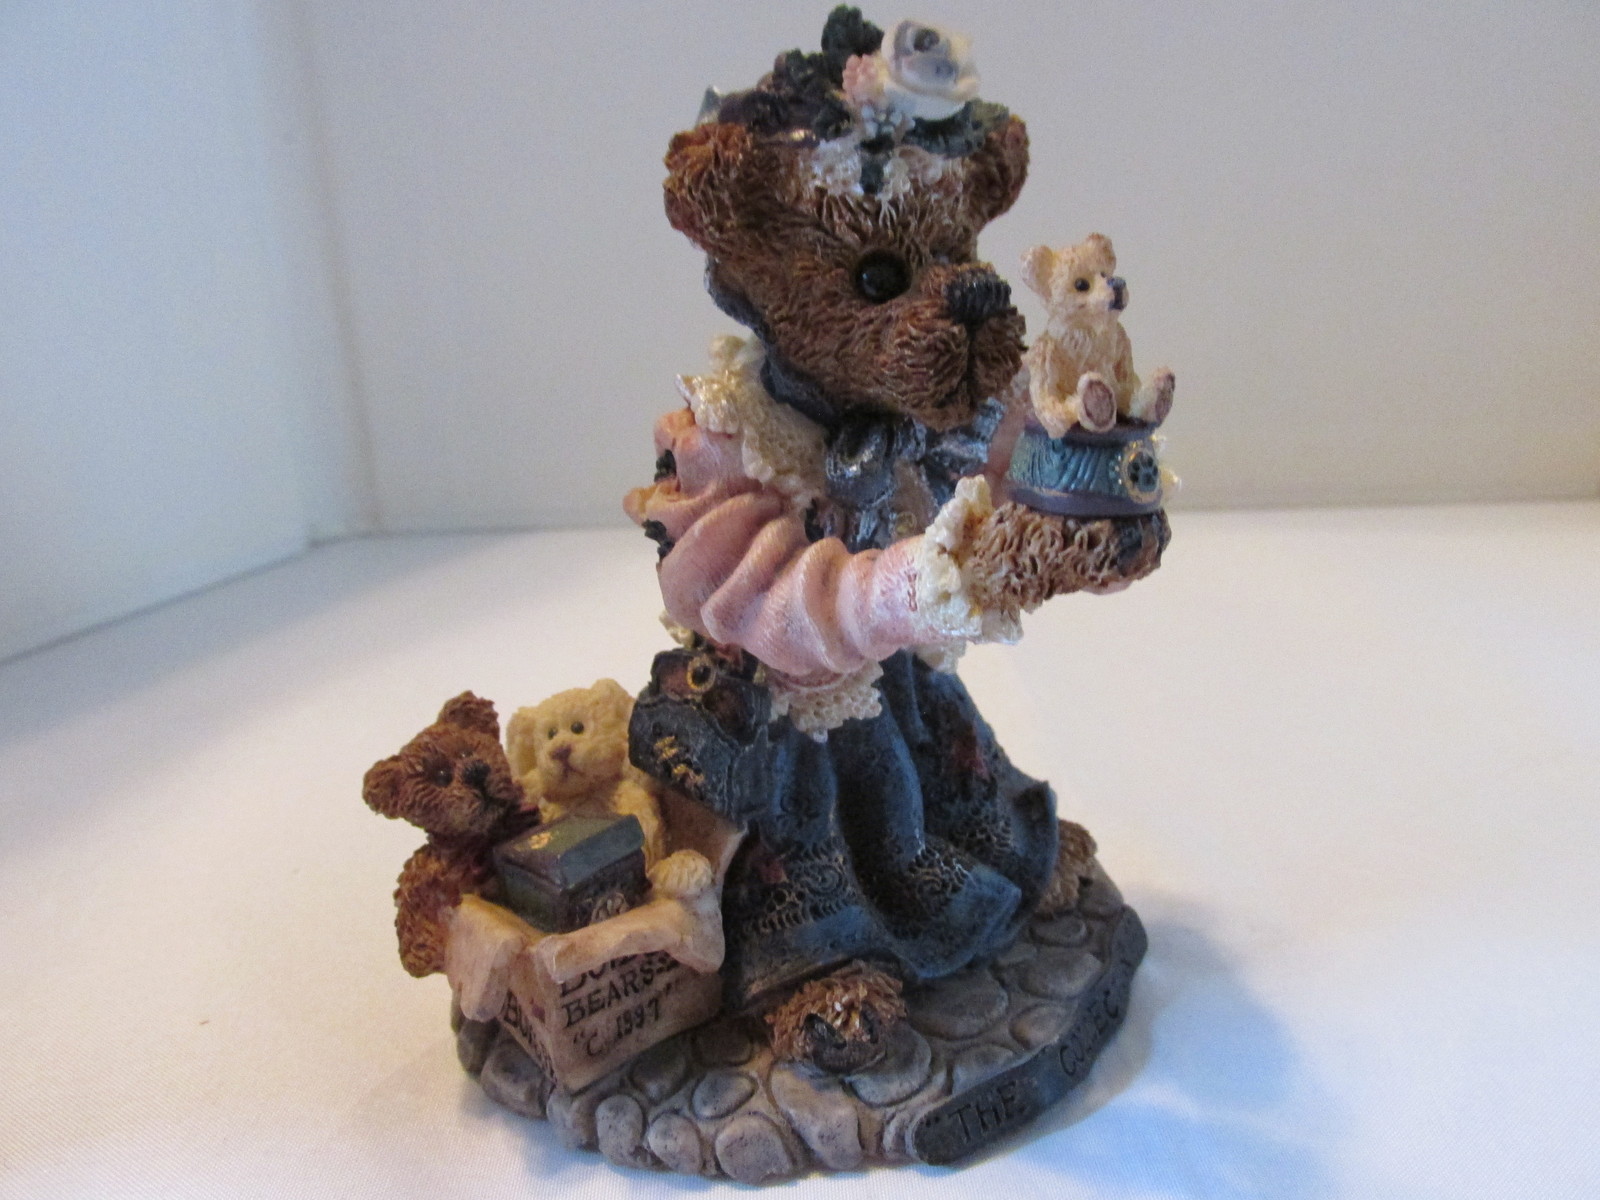 Primary image for Vintage Boyds Bears & Friends Figurine "The Collector", 1998, No Wear